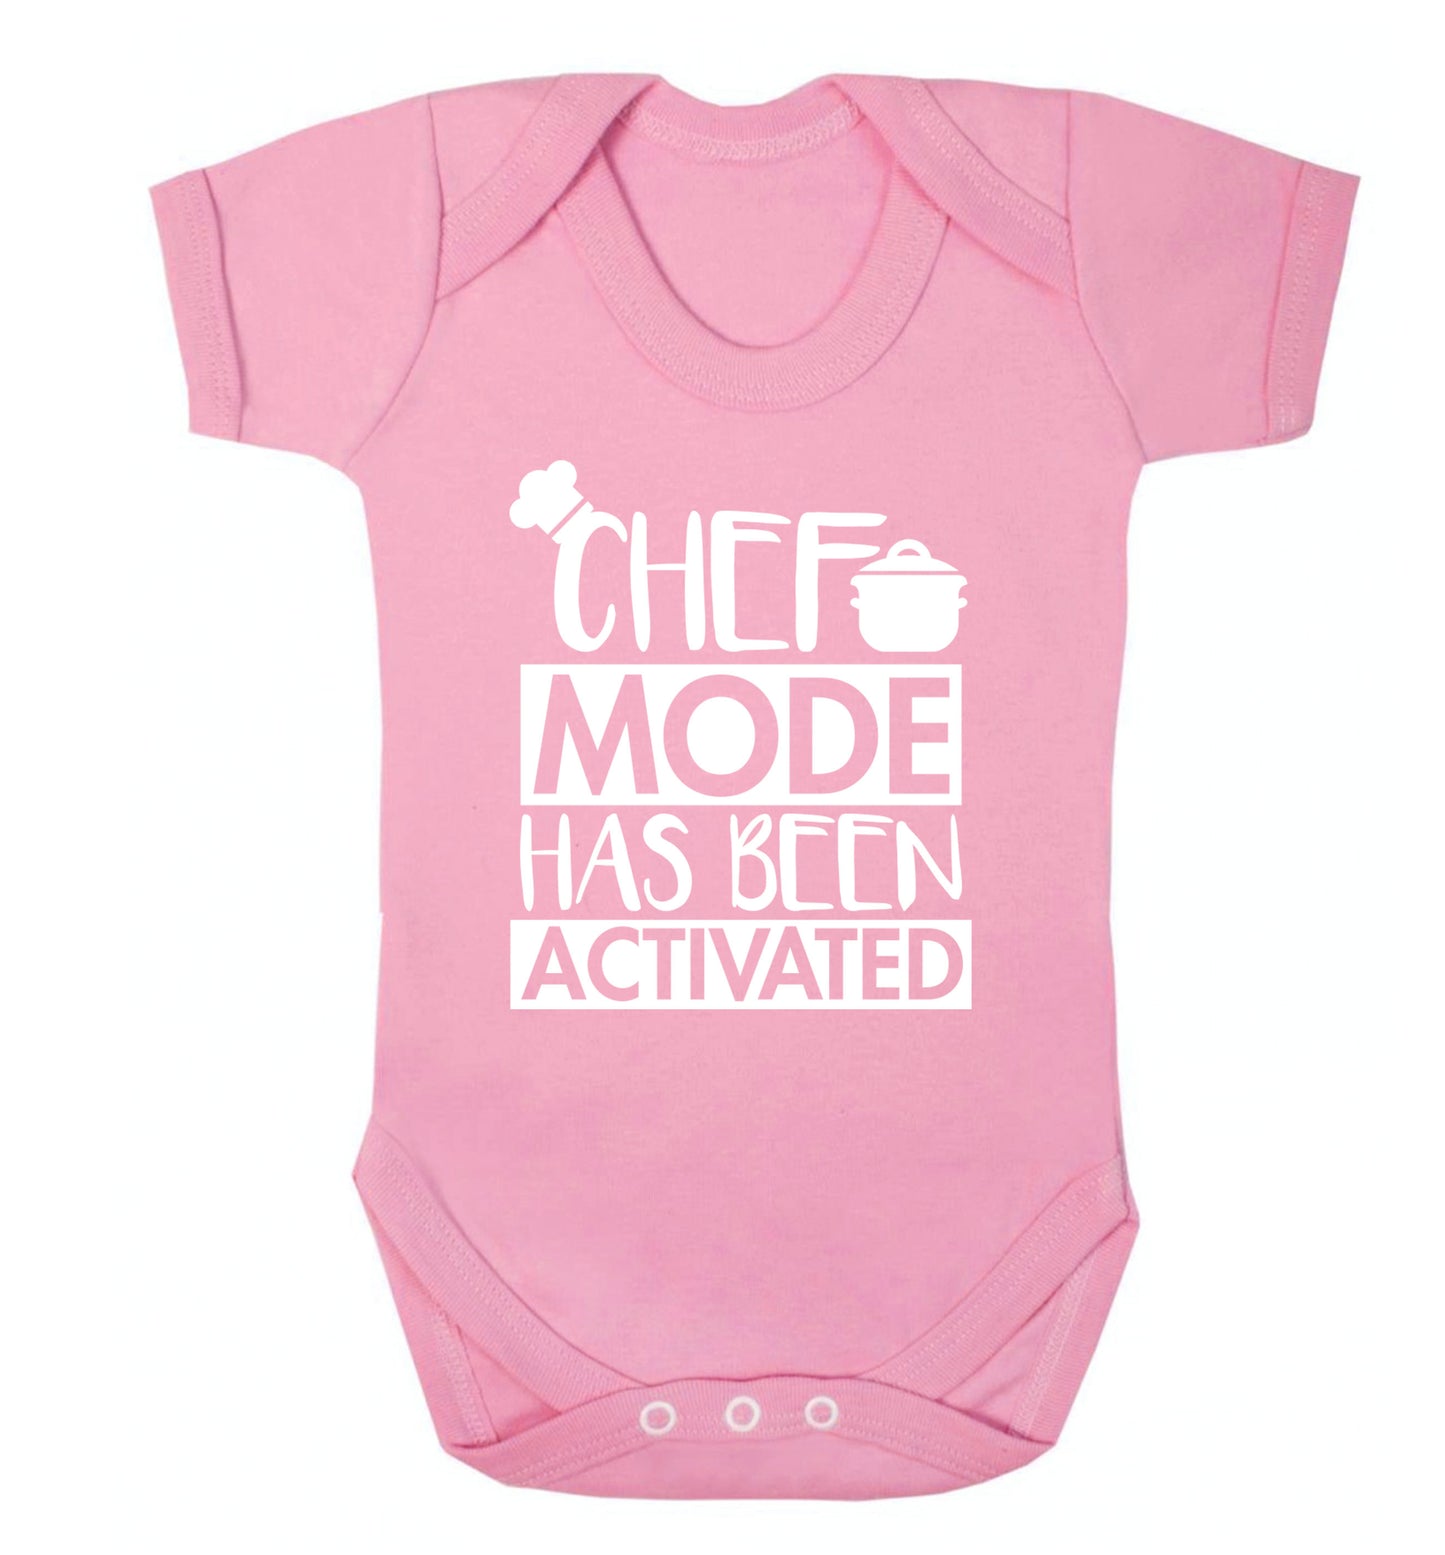 Chef mode has been activated Baby Vest pale pink 18-24 months